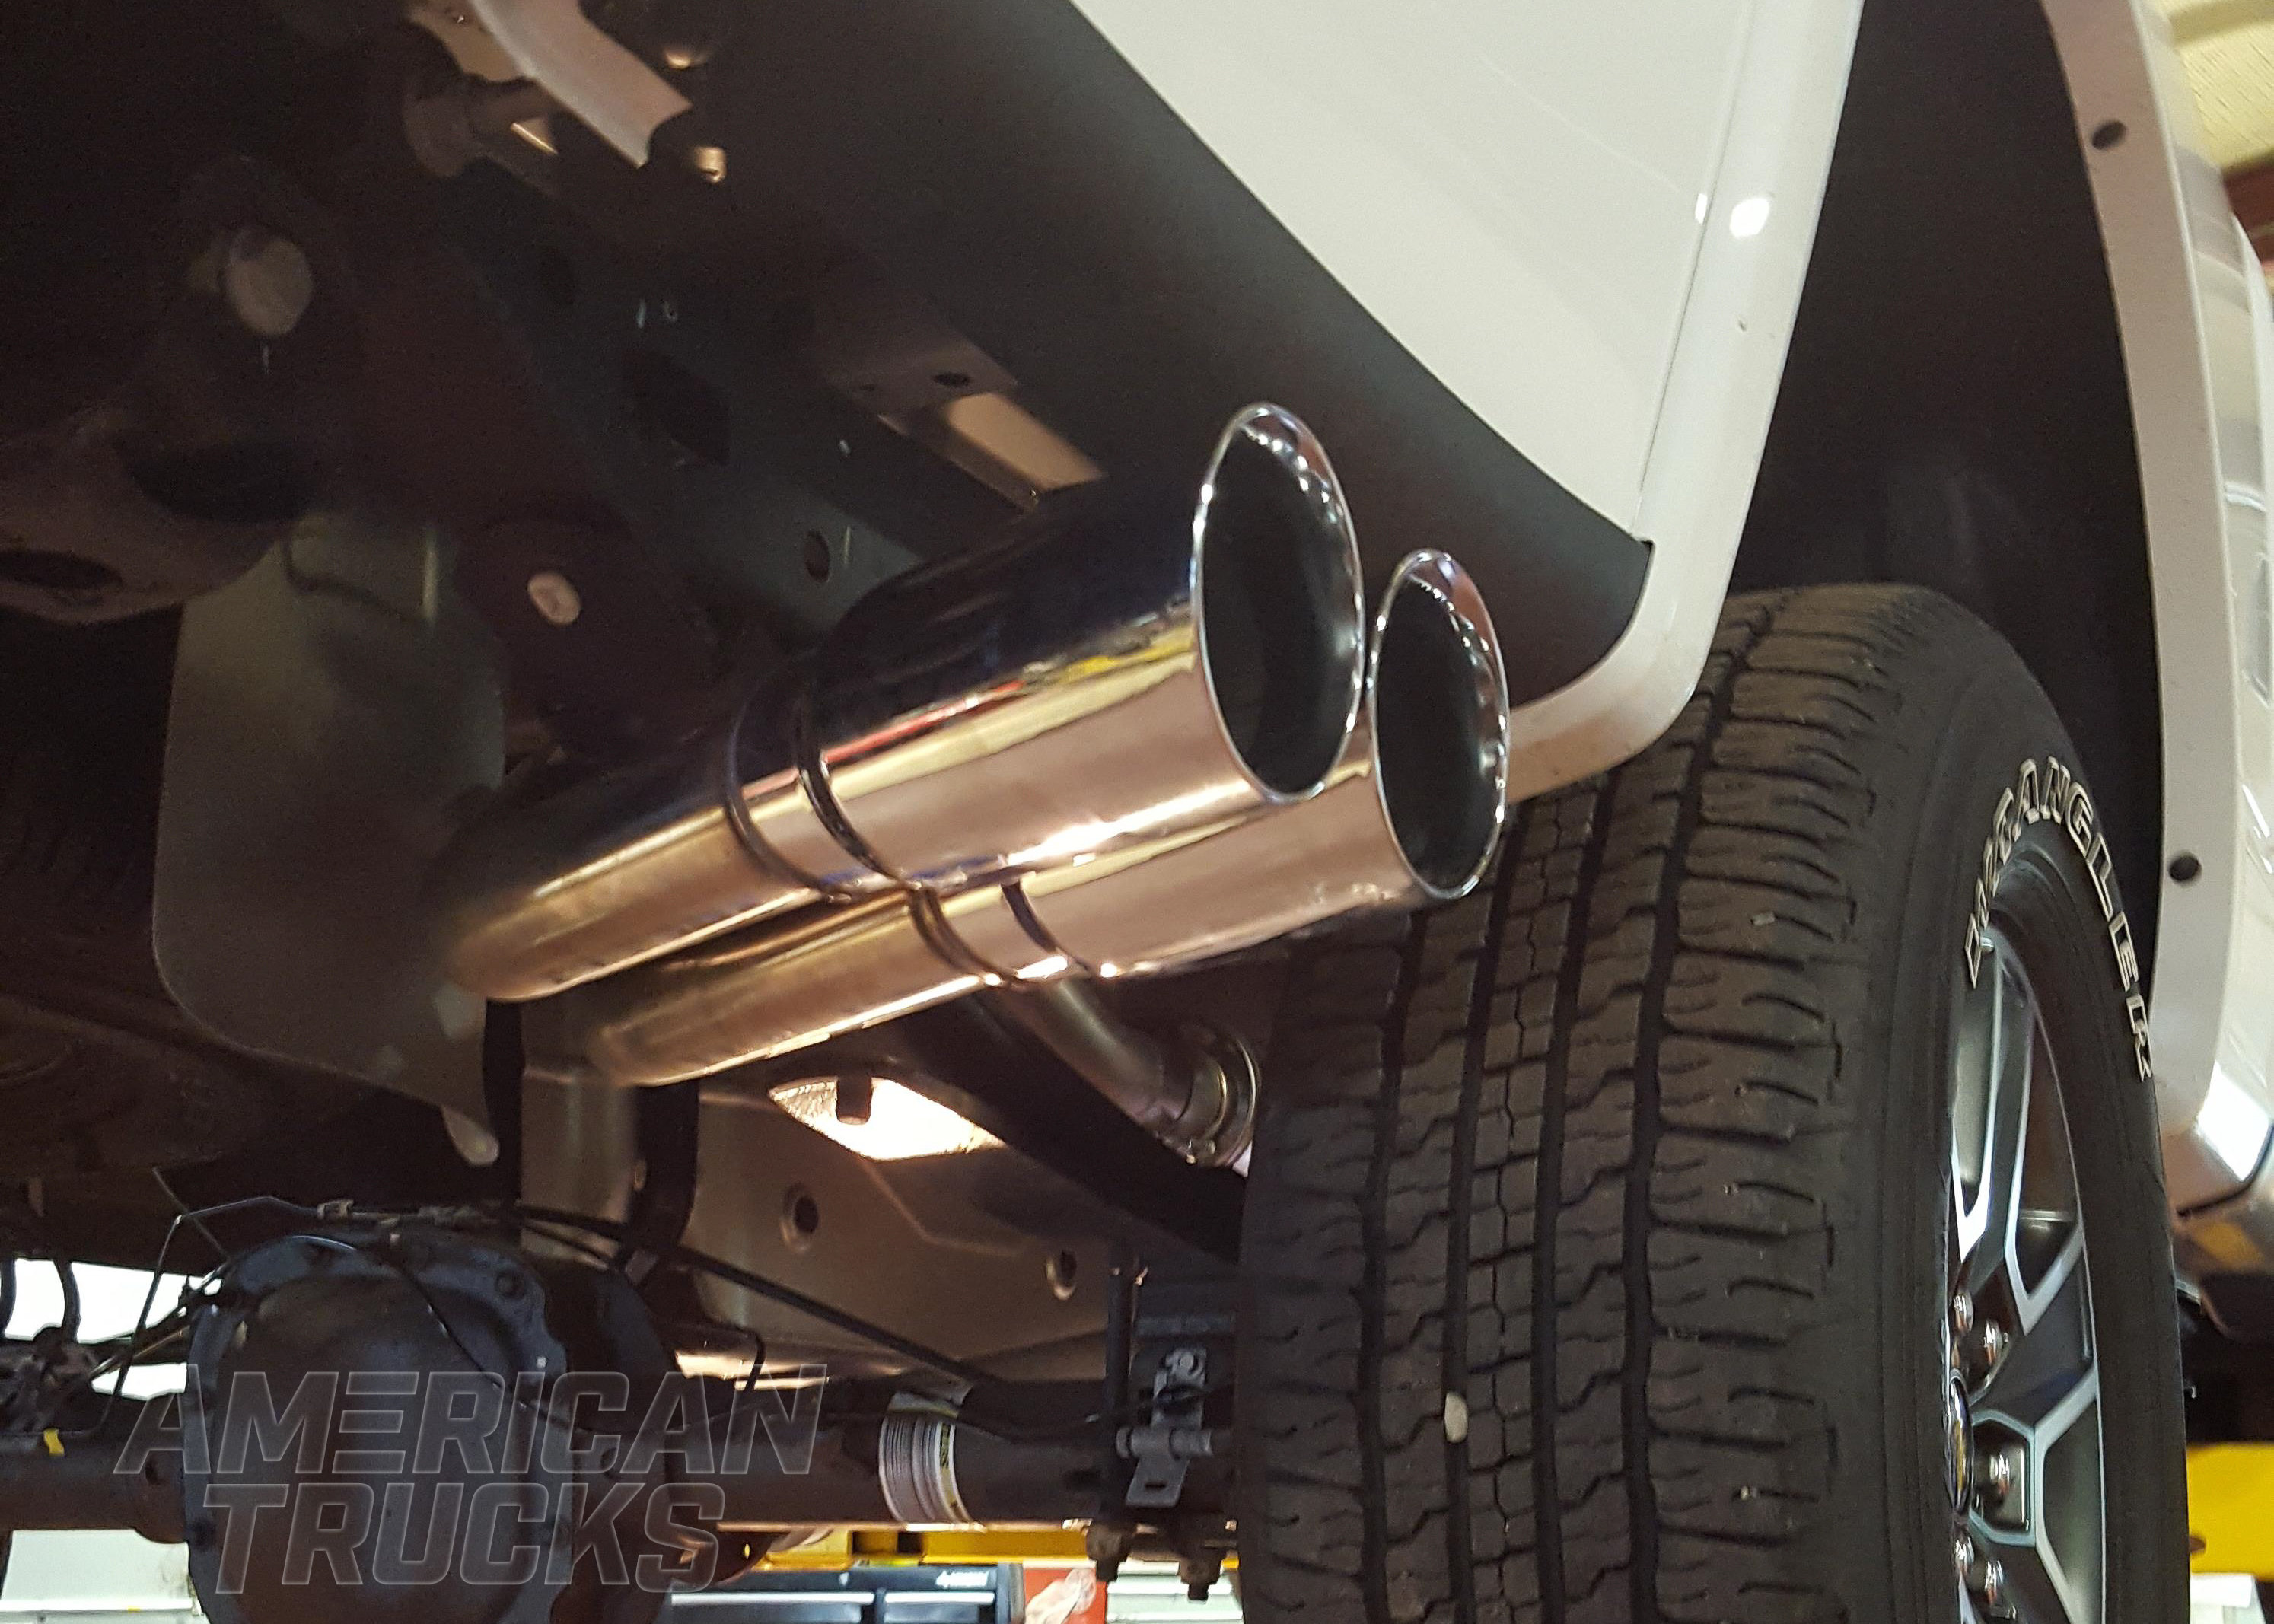 2015 5.0L F150 with a Magnaflow Exhaust System